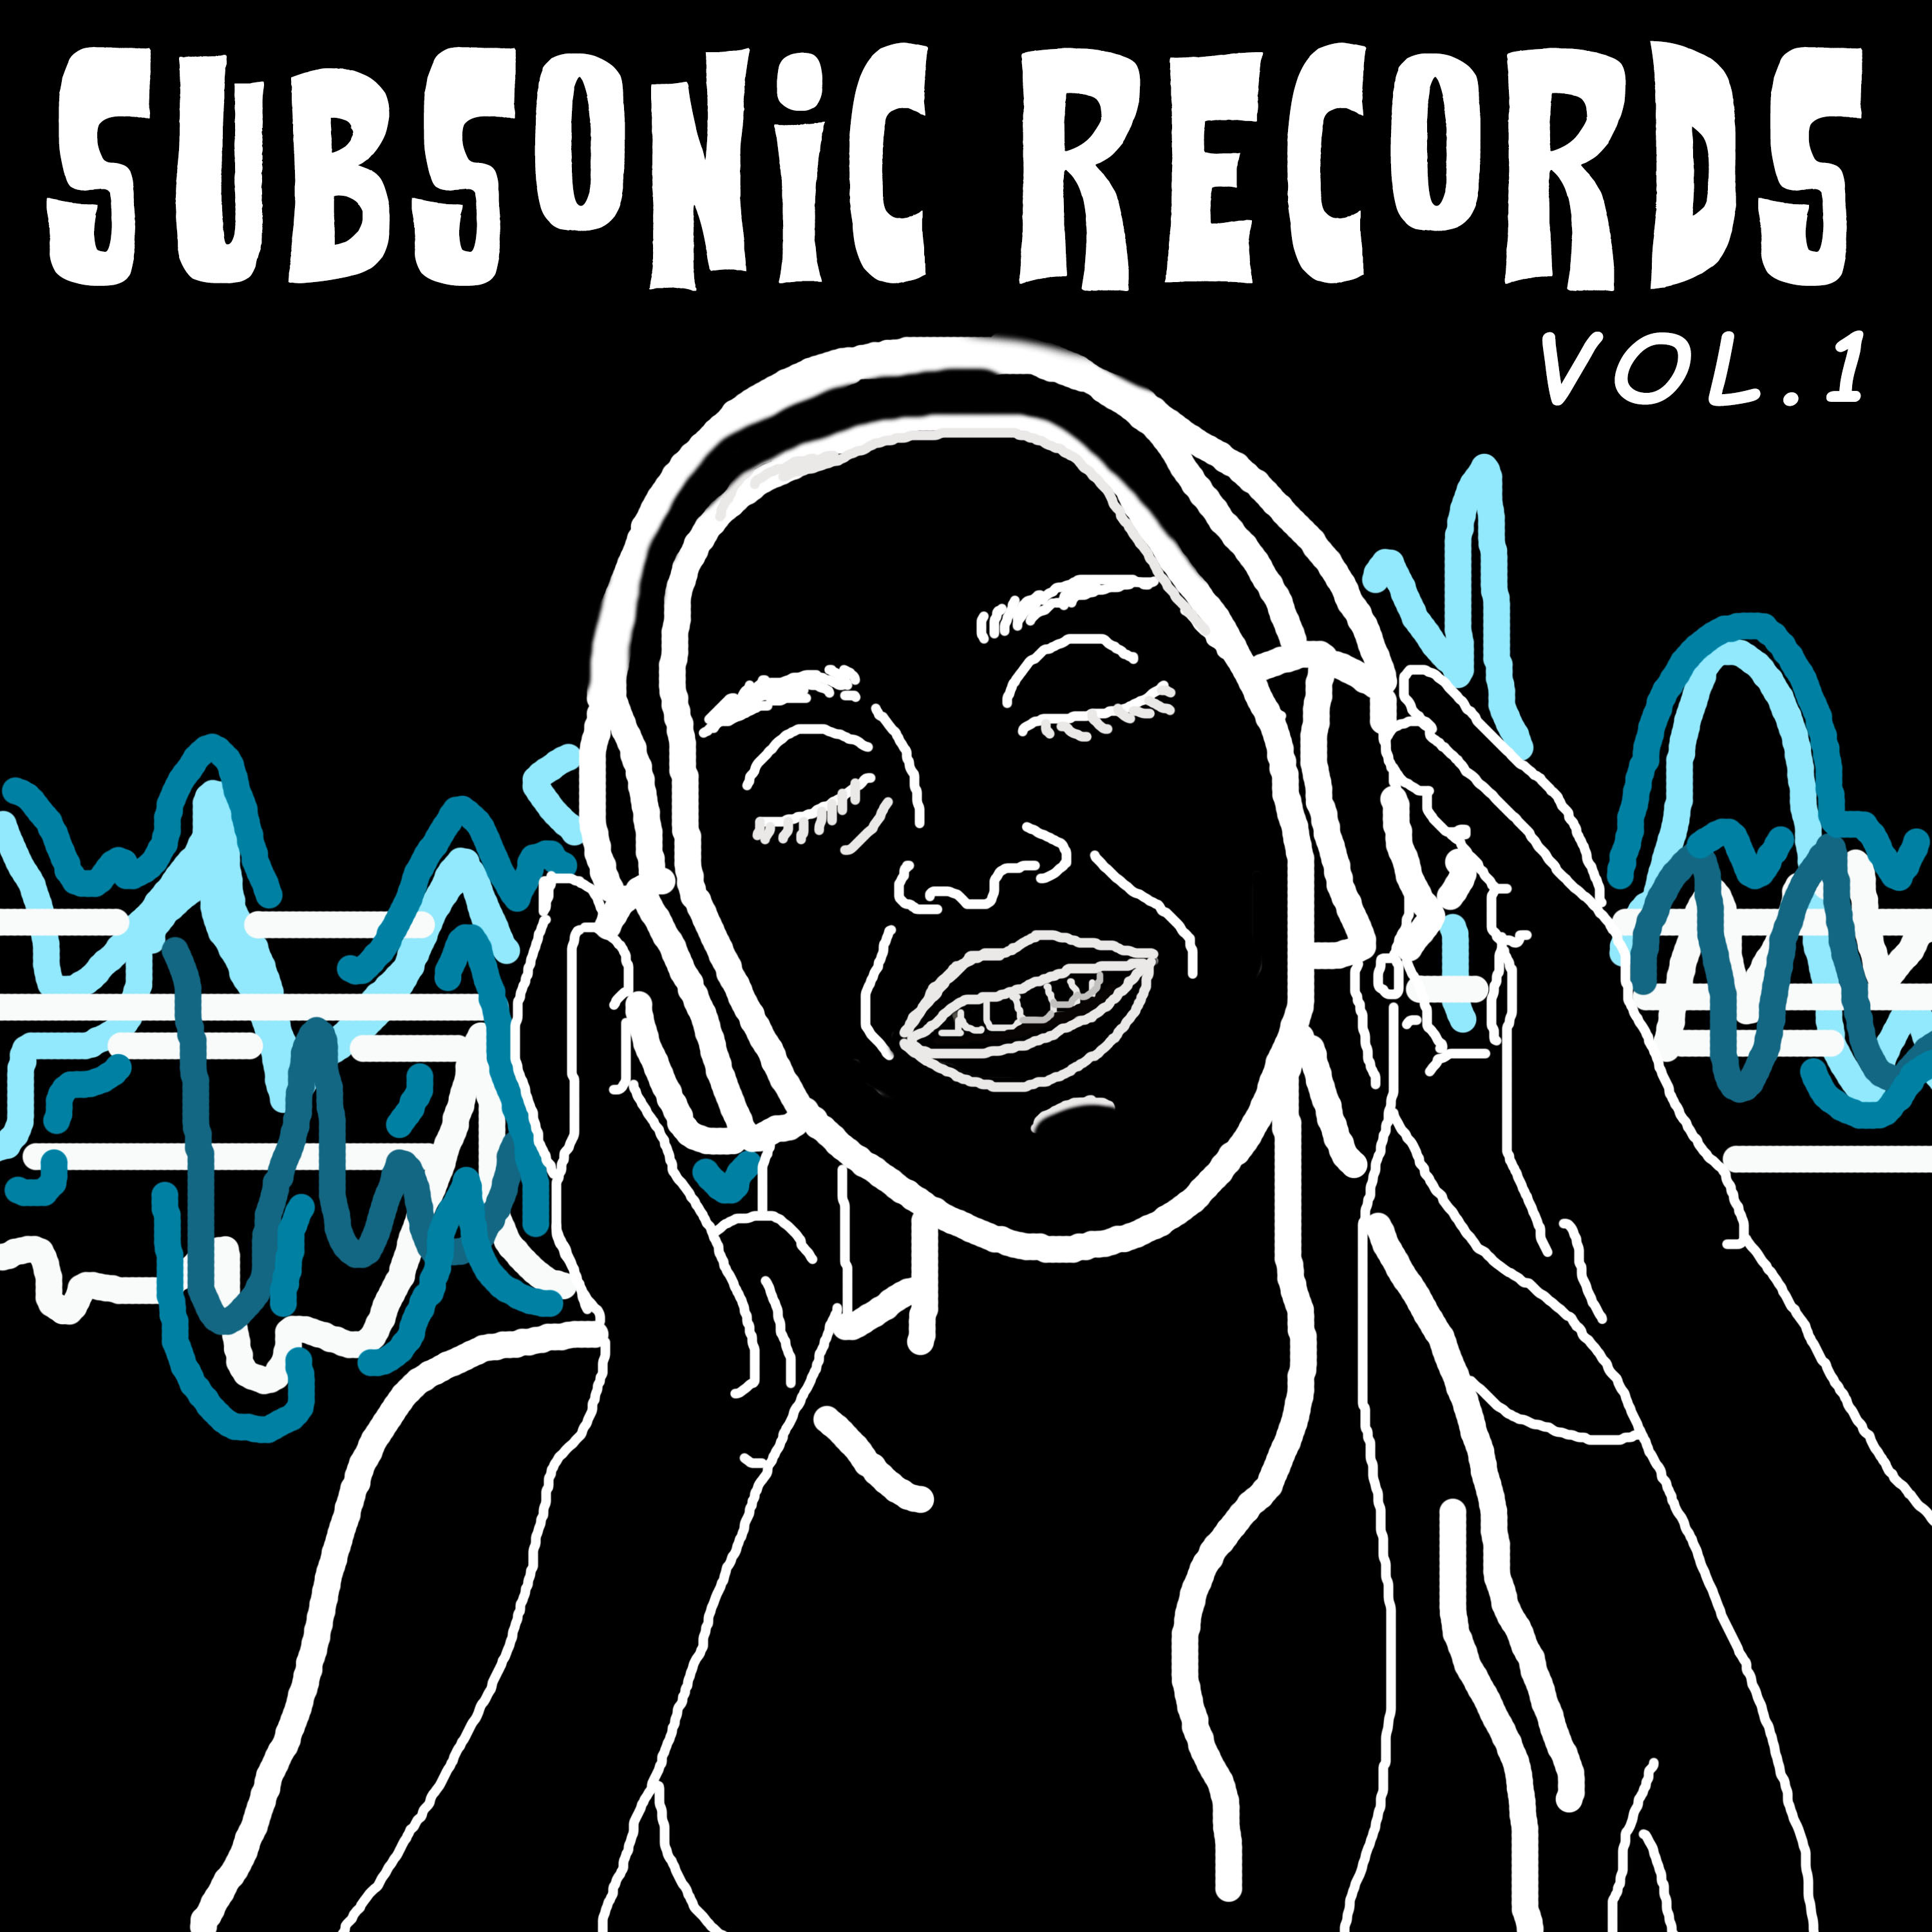 Subsonic Records Vol. 1